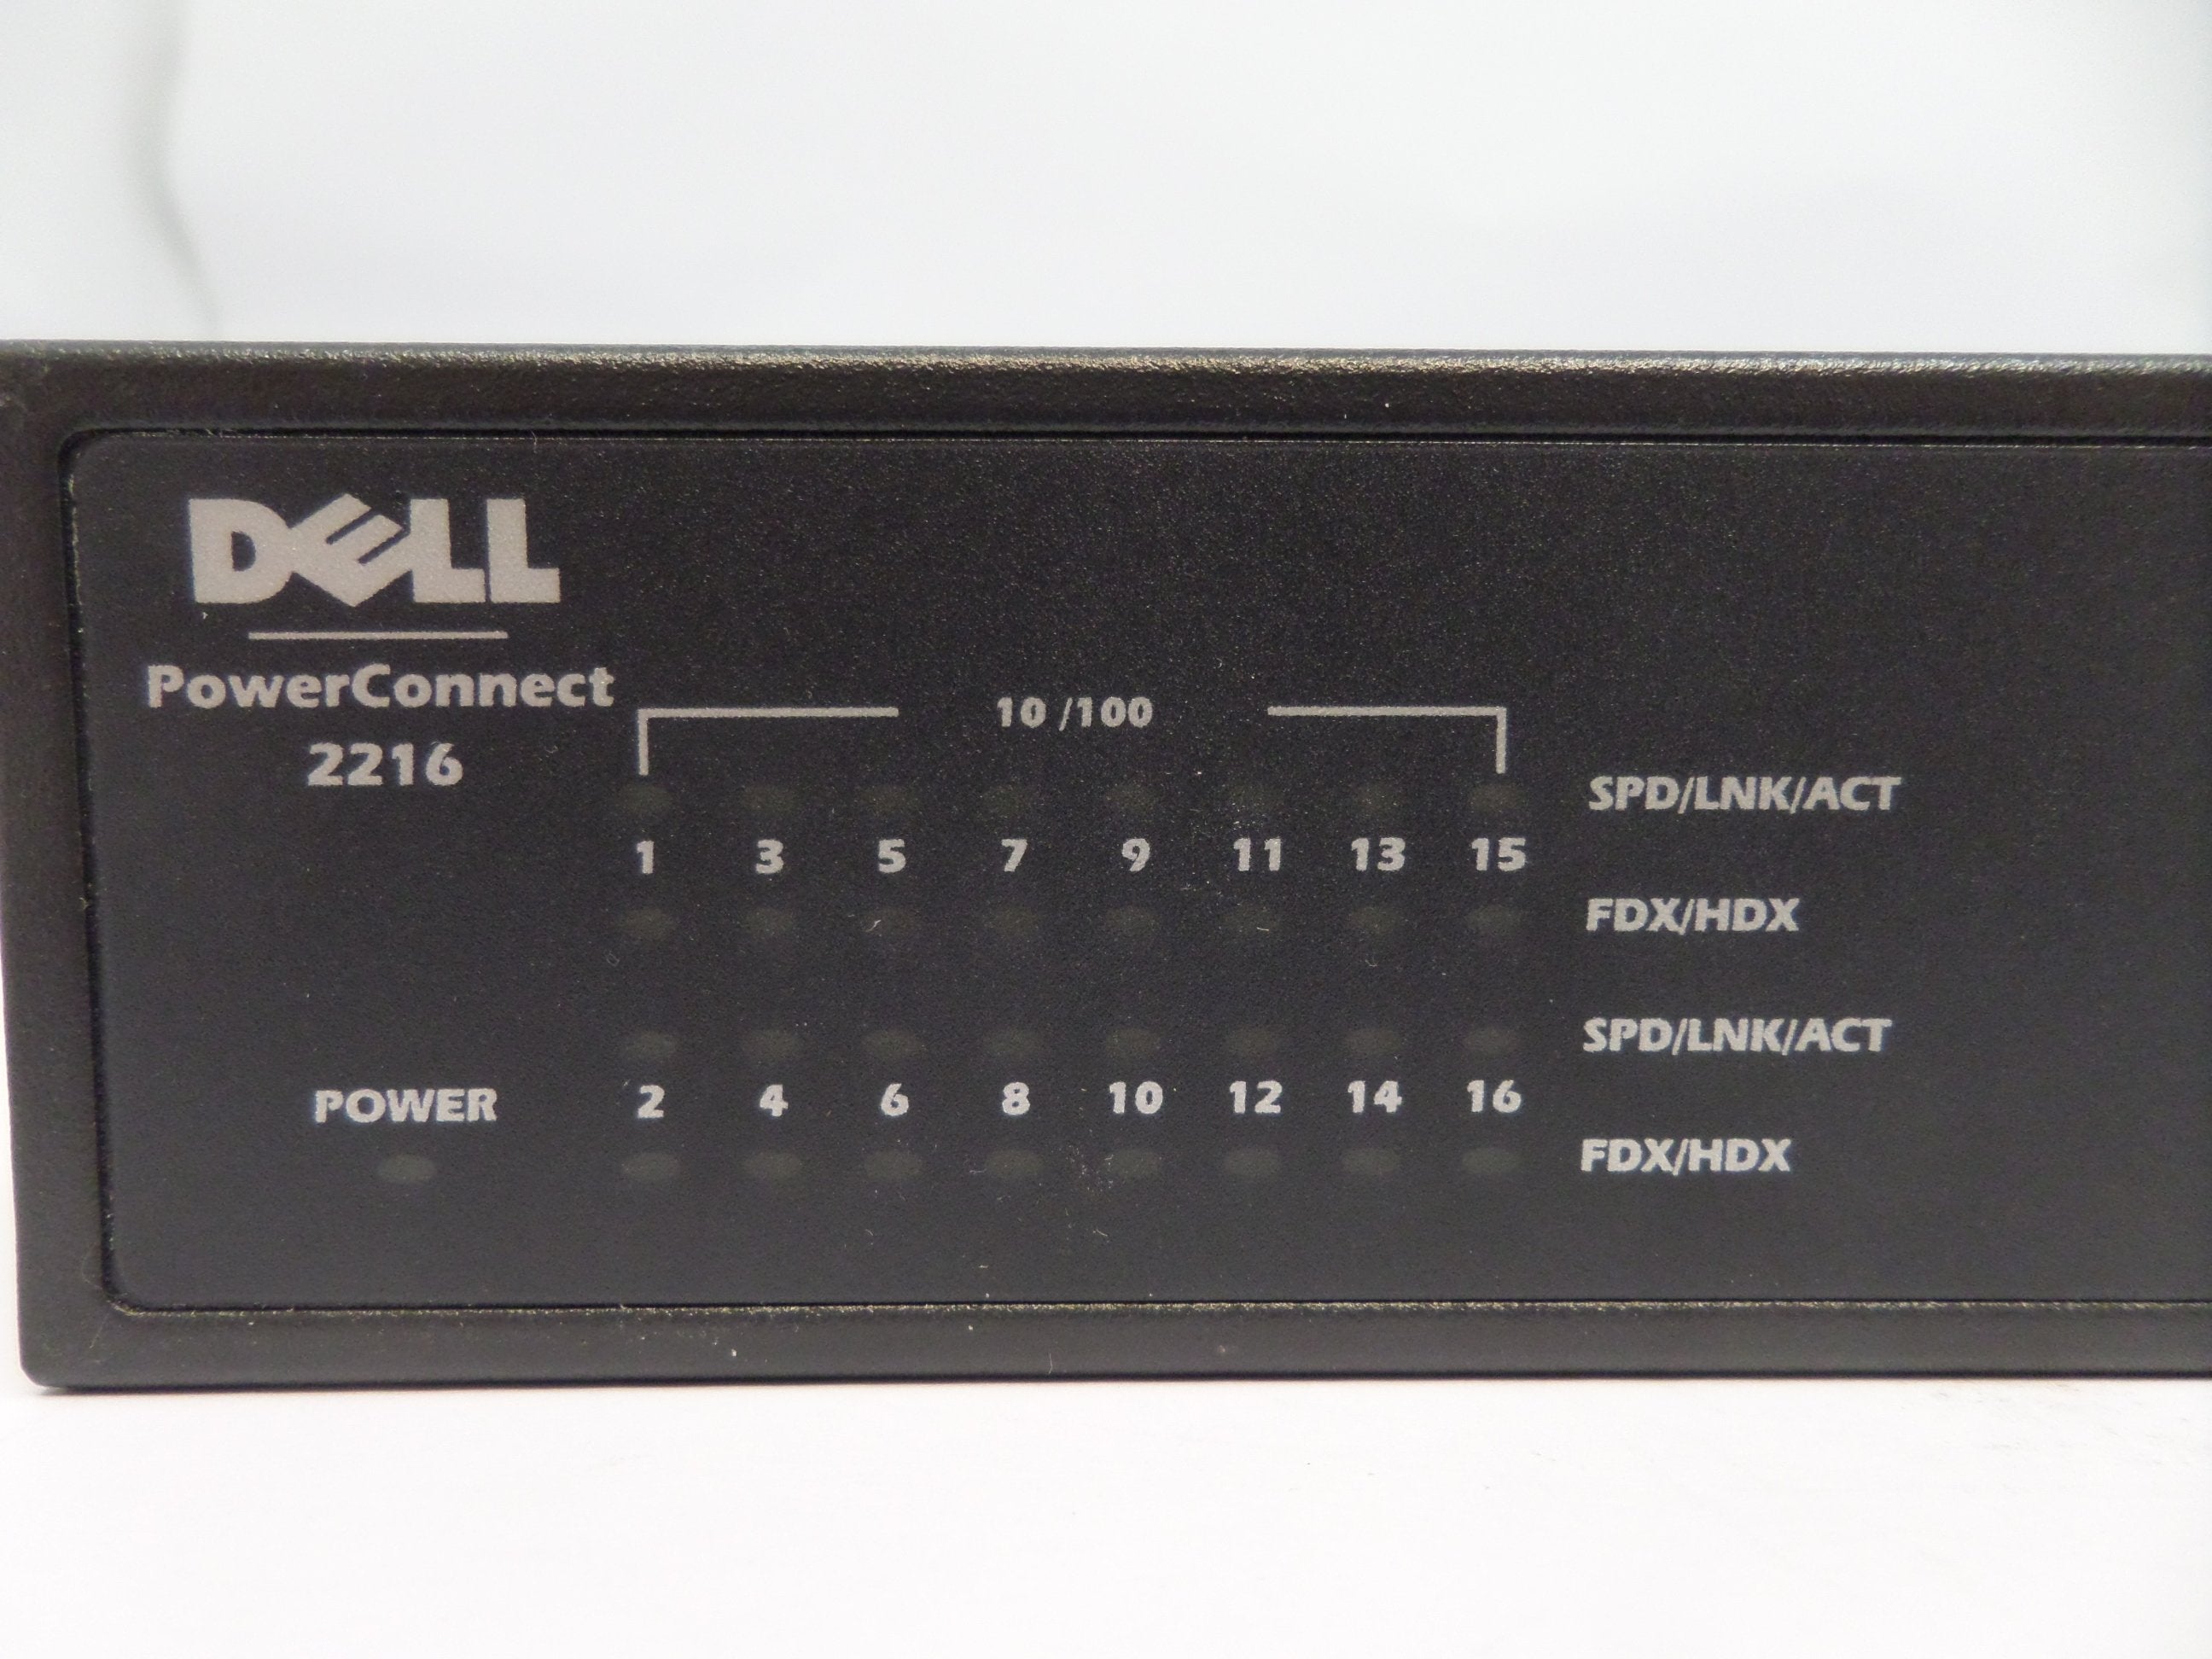 PR25823_0WJ756_Dell PowerConnect 2216 16-Port Switch - Image3